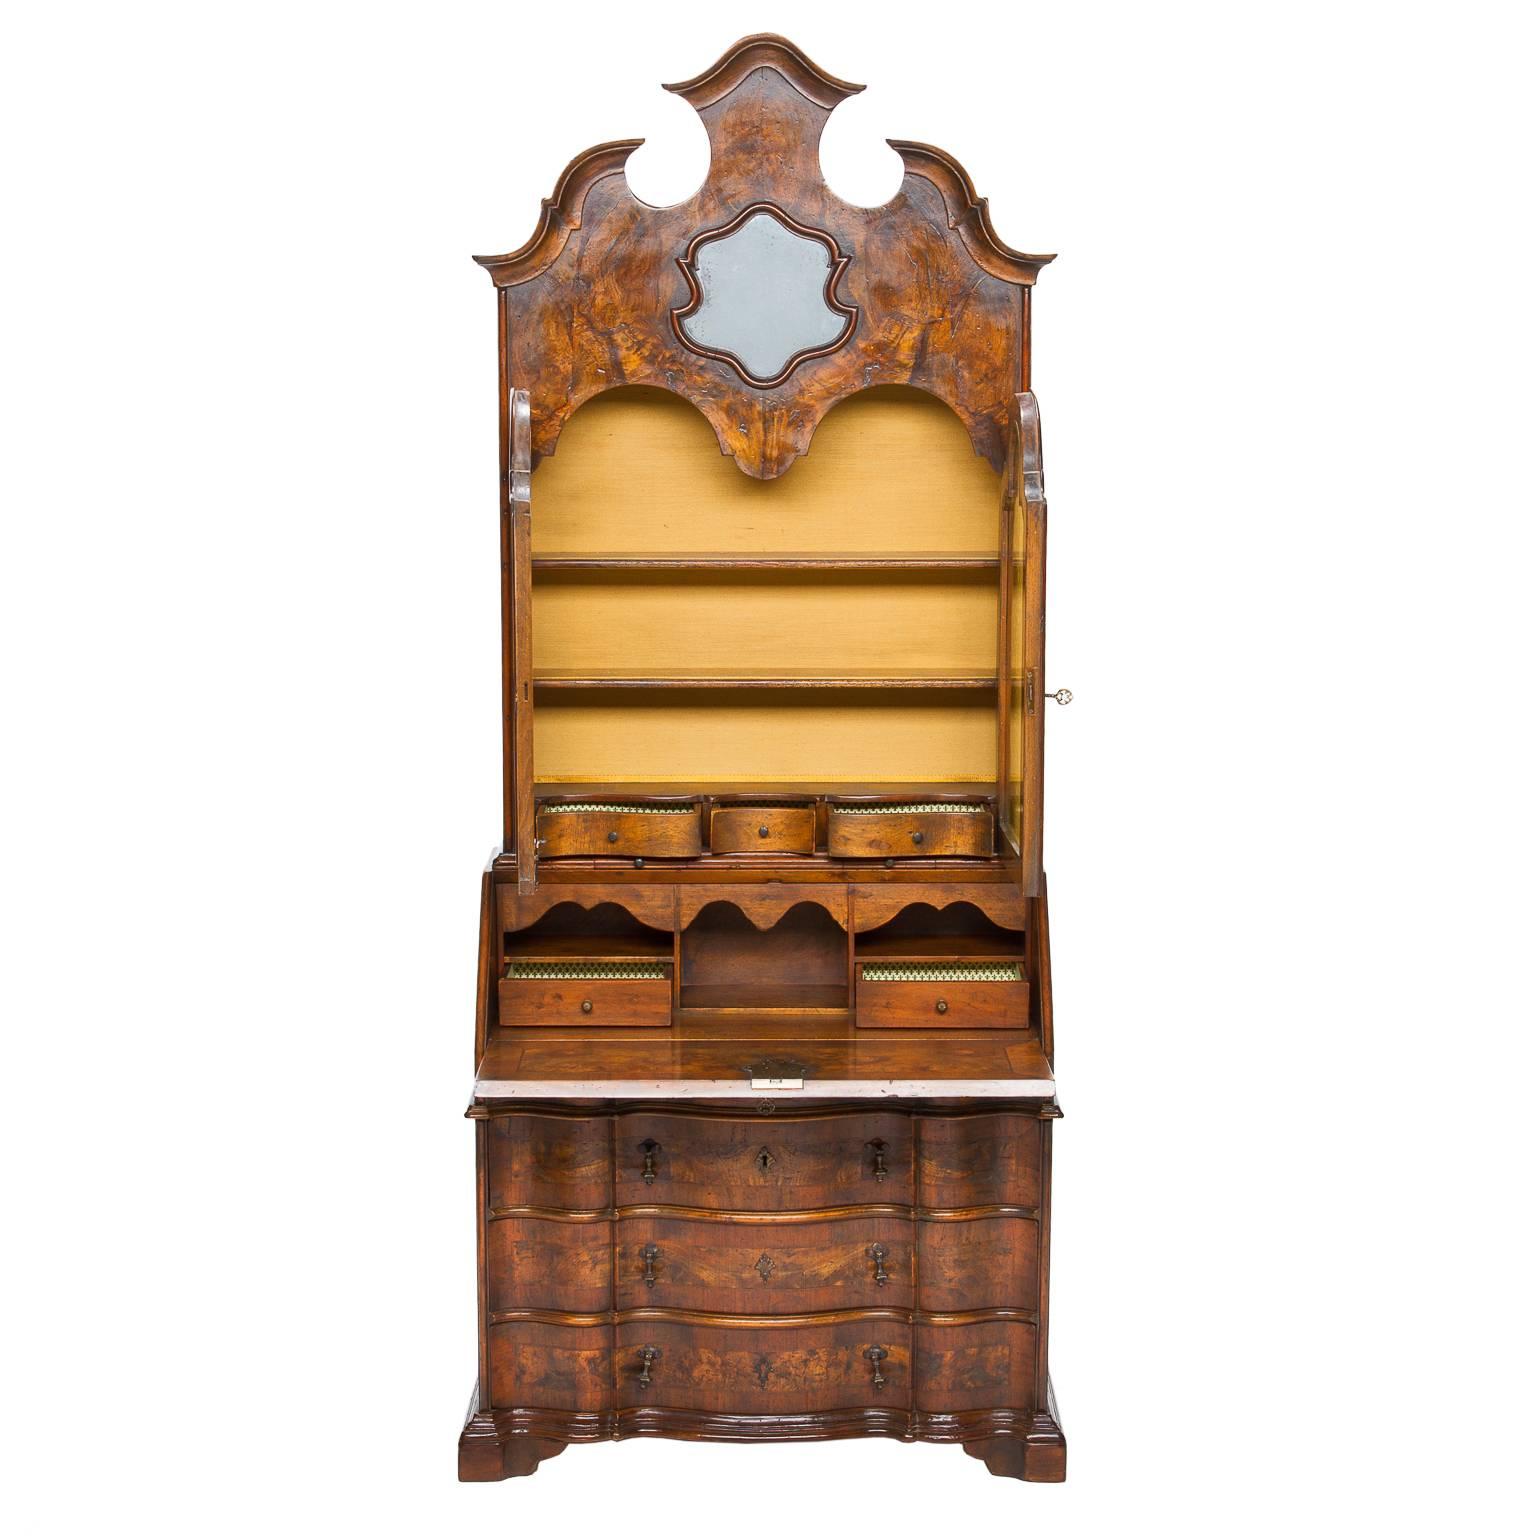 A striking Venetian burl walnut secretary. Made in the early era of the 20th century. Exceptional choices of burl walnut veneers. Two doors with beveled glass and centered above is a trumeau surrounded by a shaped crown. Lid lays open to reveal a